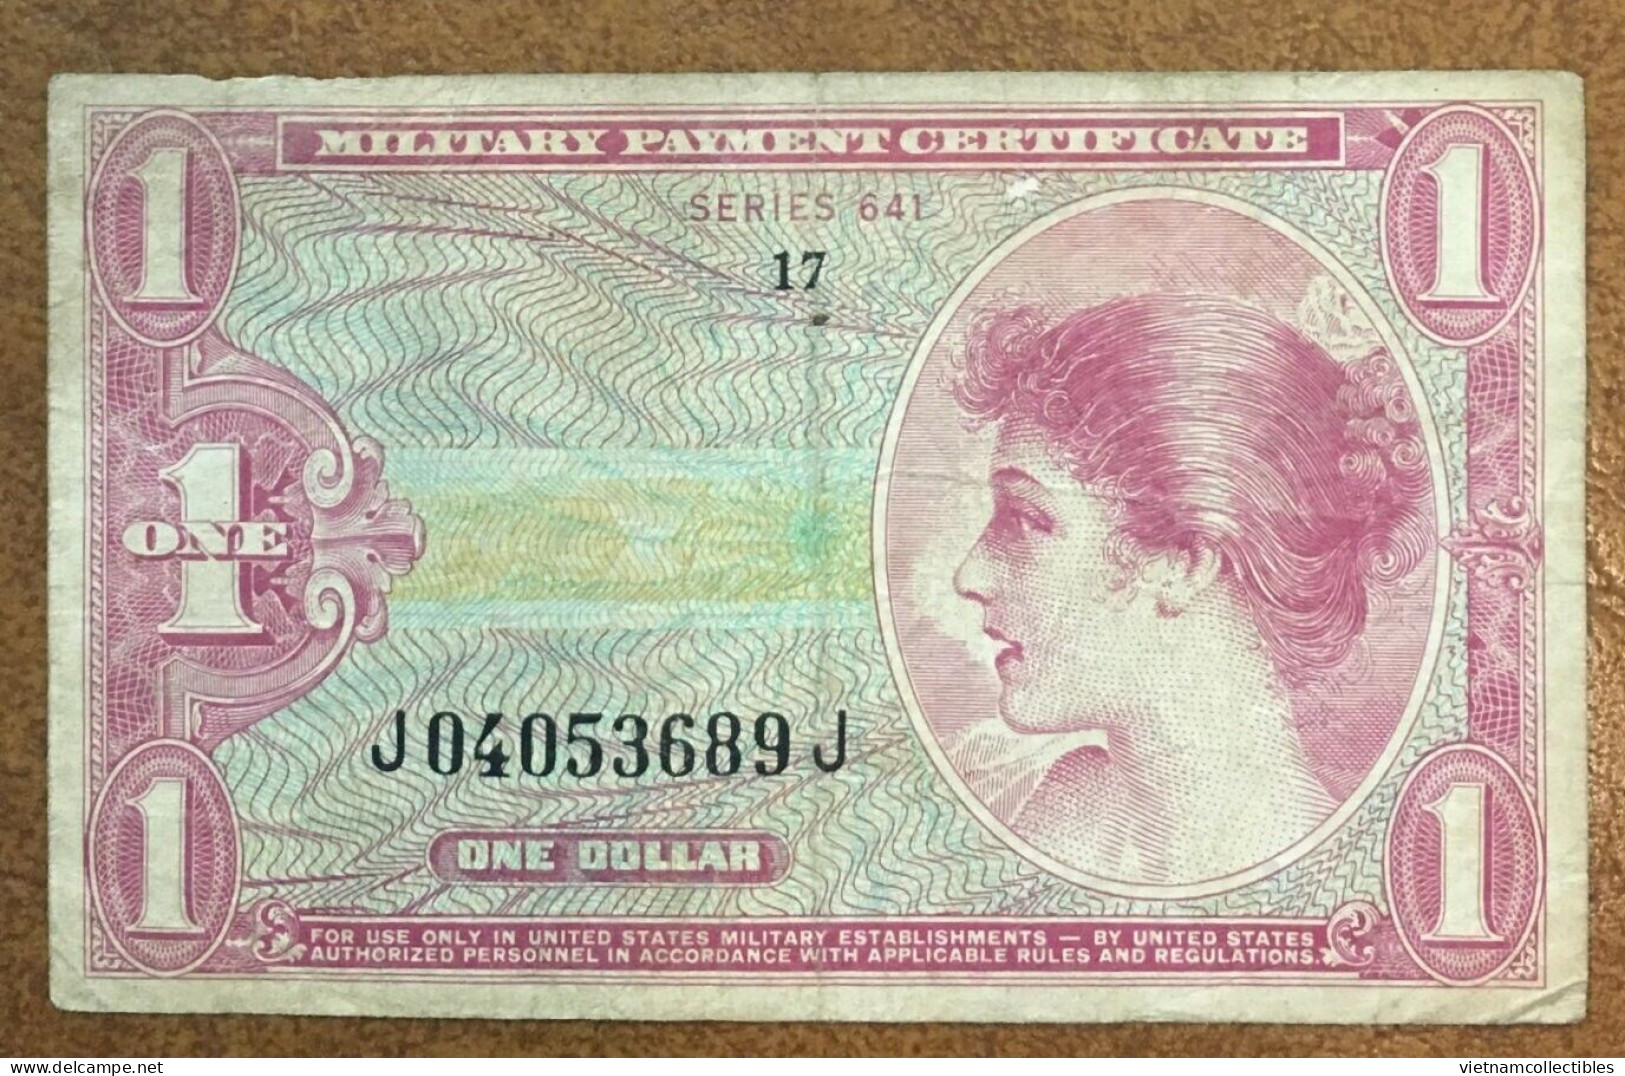 USA MPC One Dollar Military Payment Series 641 VF Banknote Note 1964 Using In Vietnam Viet Nam - Plate # 17 / 2 Photos - 1965-1968 - Series 641